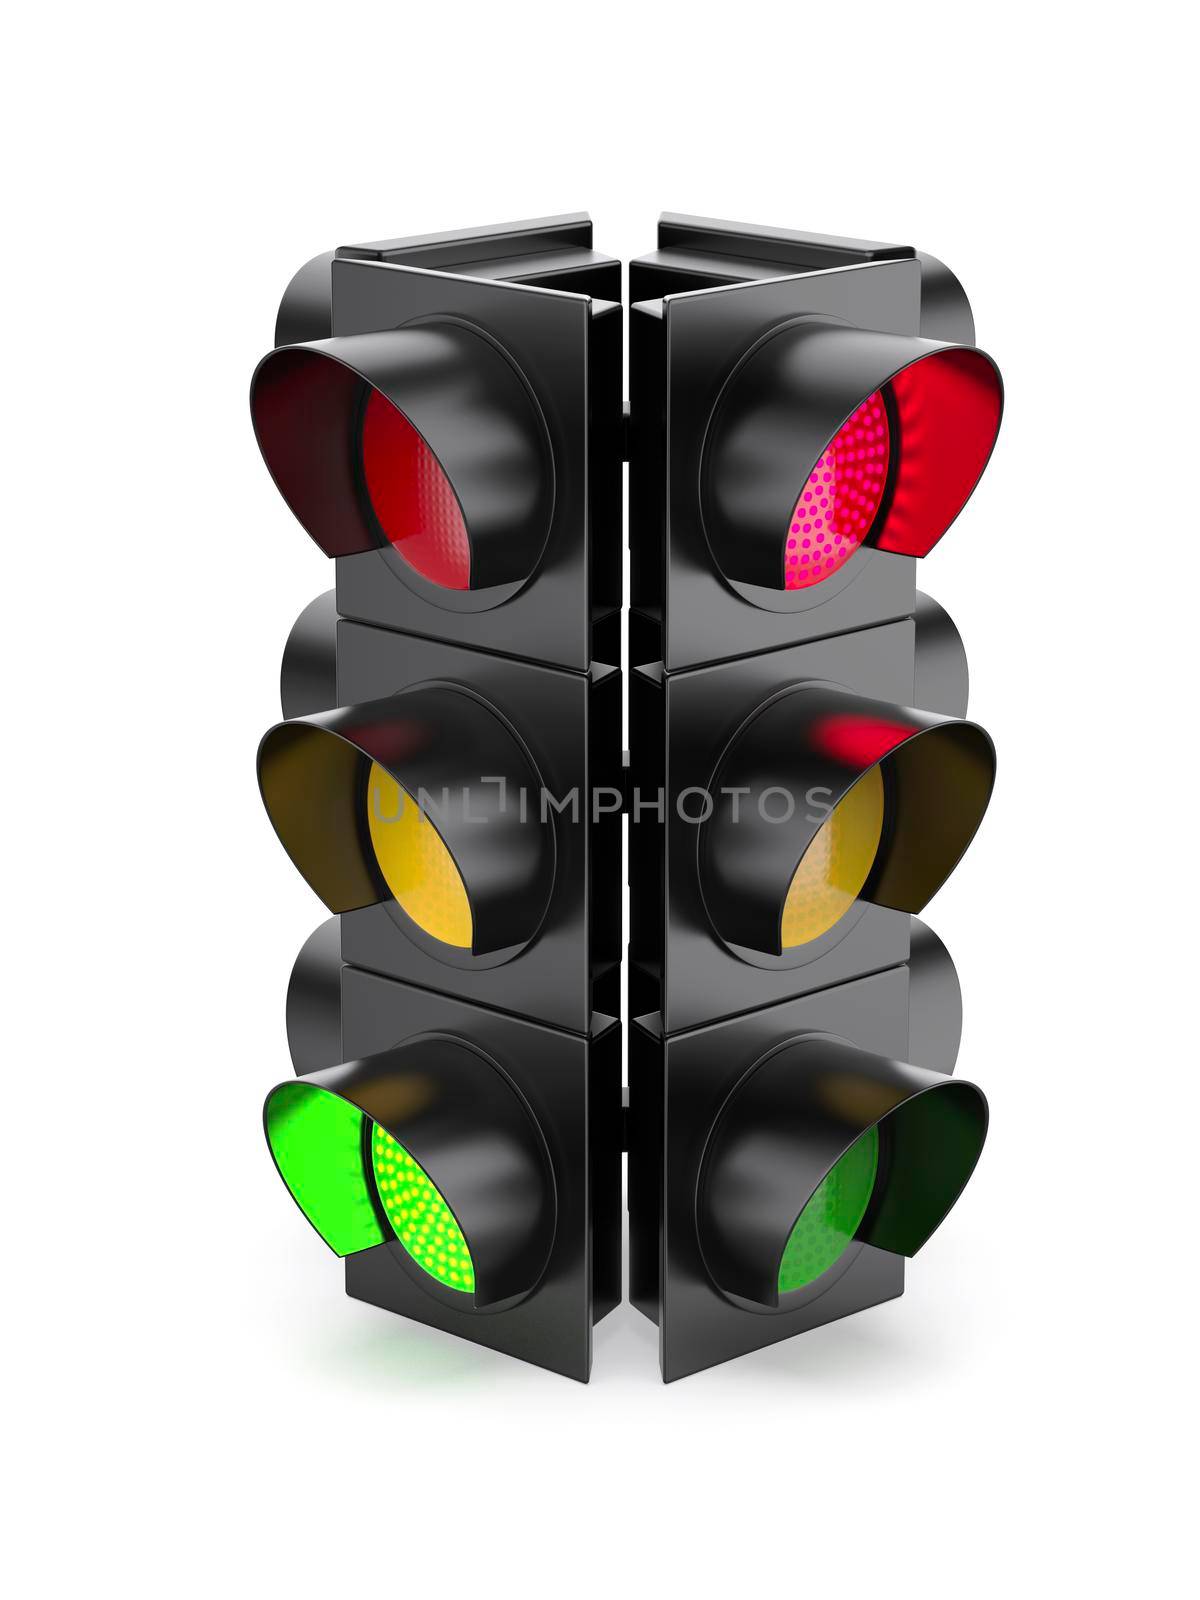 Traffic lights by magraphics